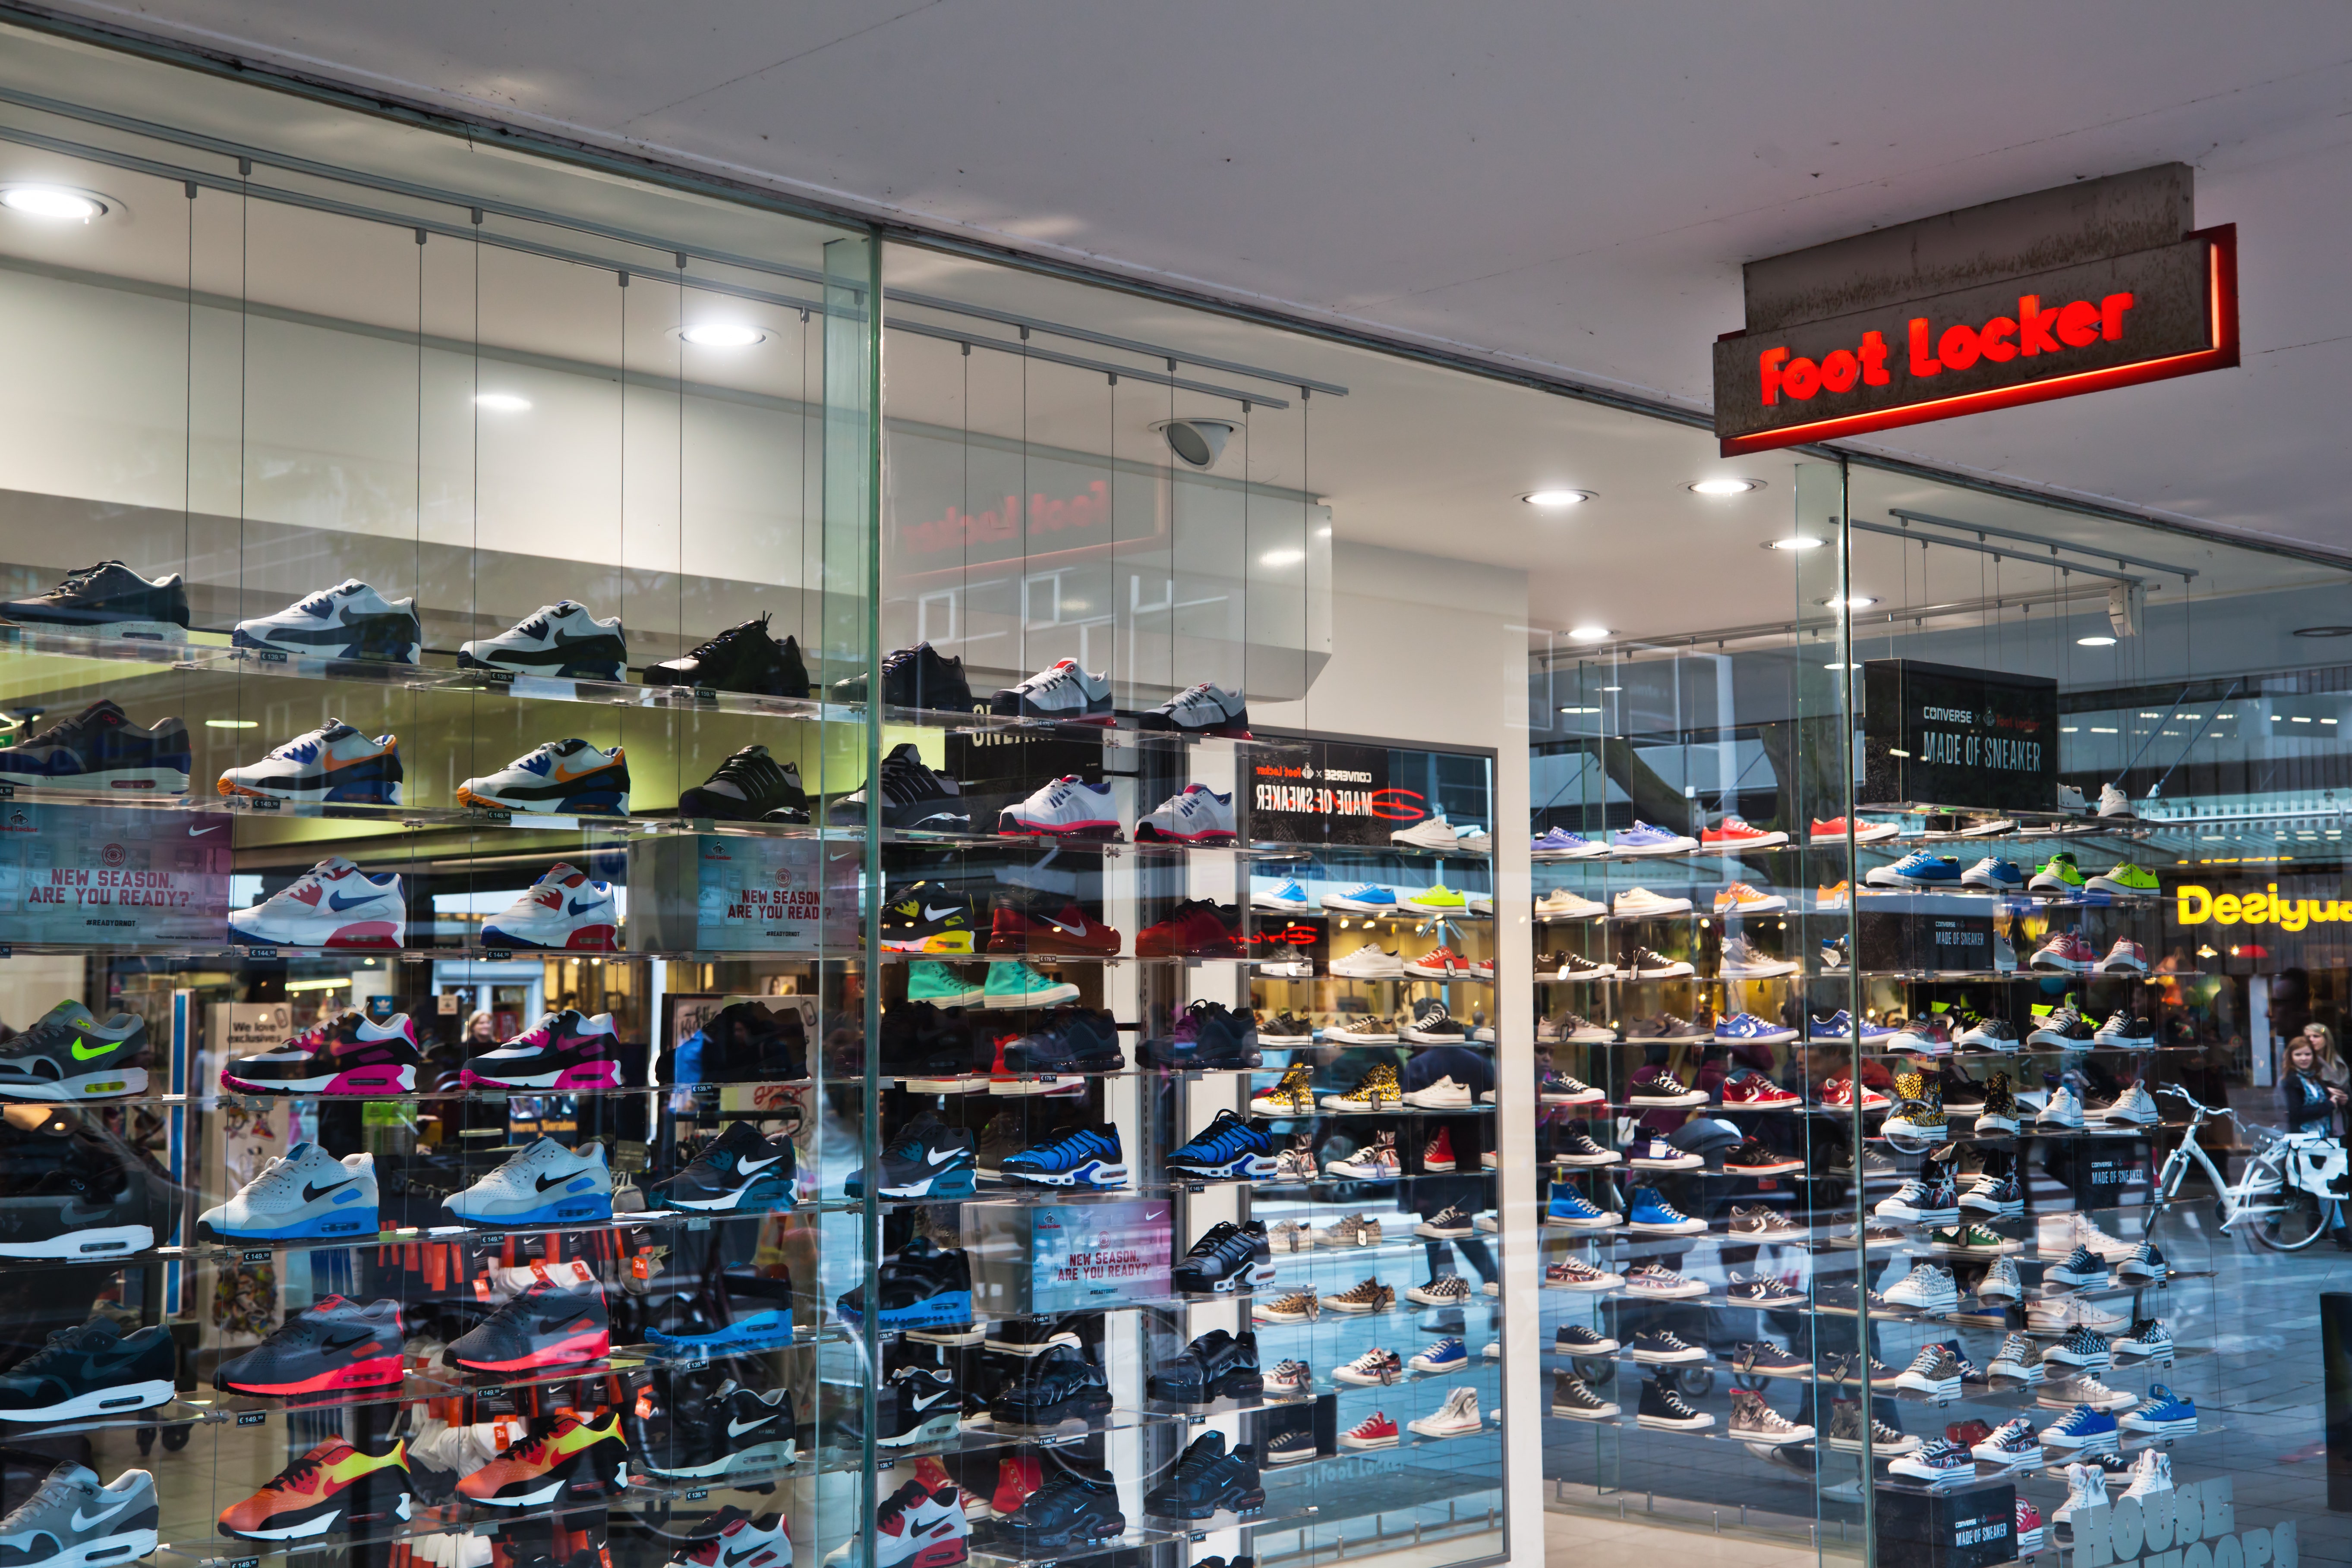 Foot Locker Stock Goes Running After Q2 Earnings: Key Levels To Watch